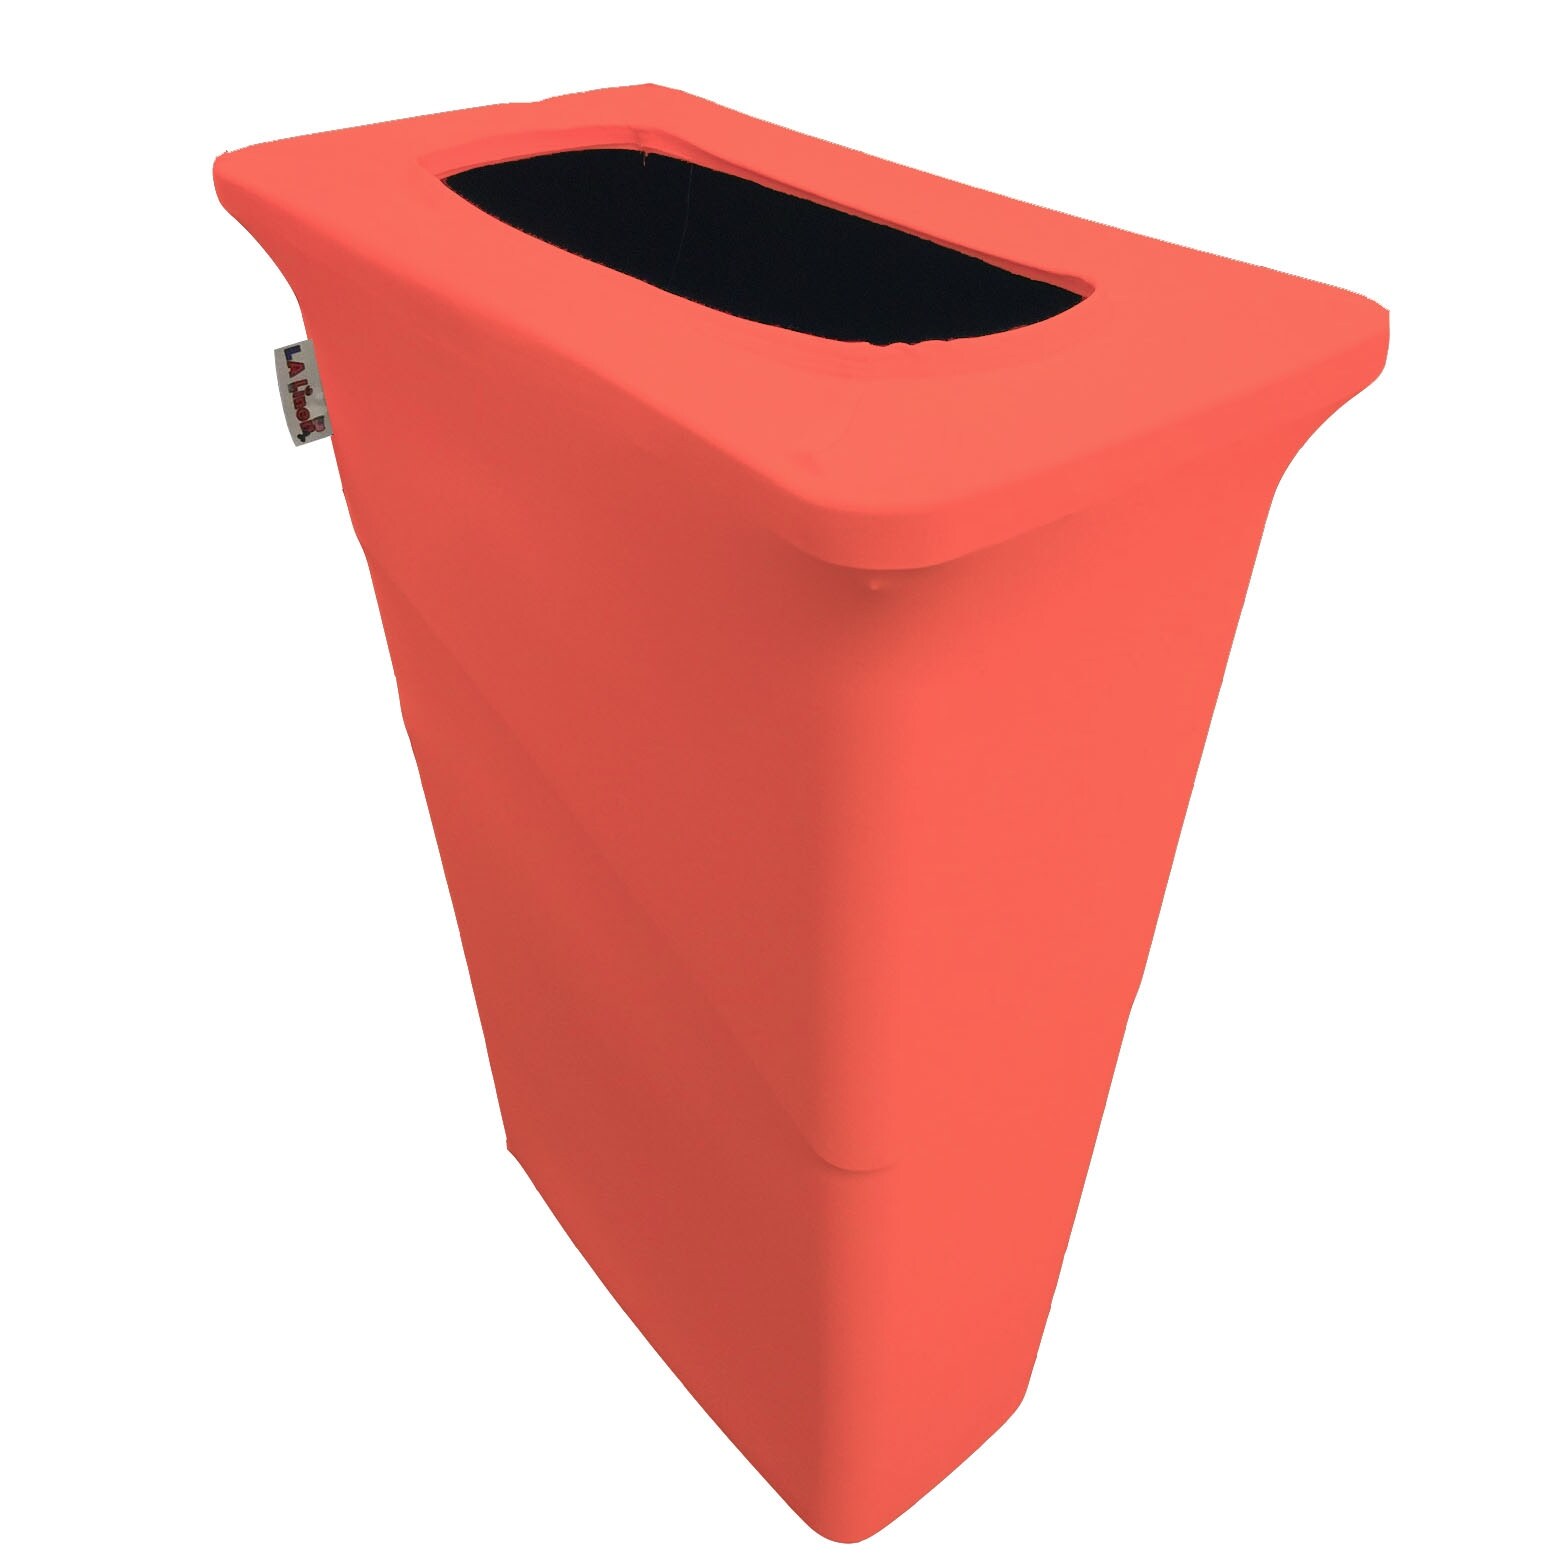 Stretch Spandex Trash Can cover for Slim Jim 23-Gallon - On Sale - Bed Bath  & Beyond - 38407372